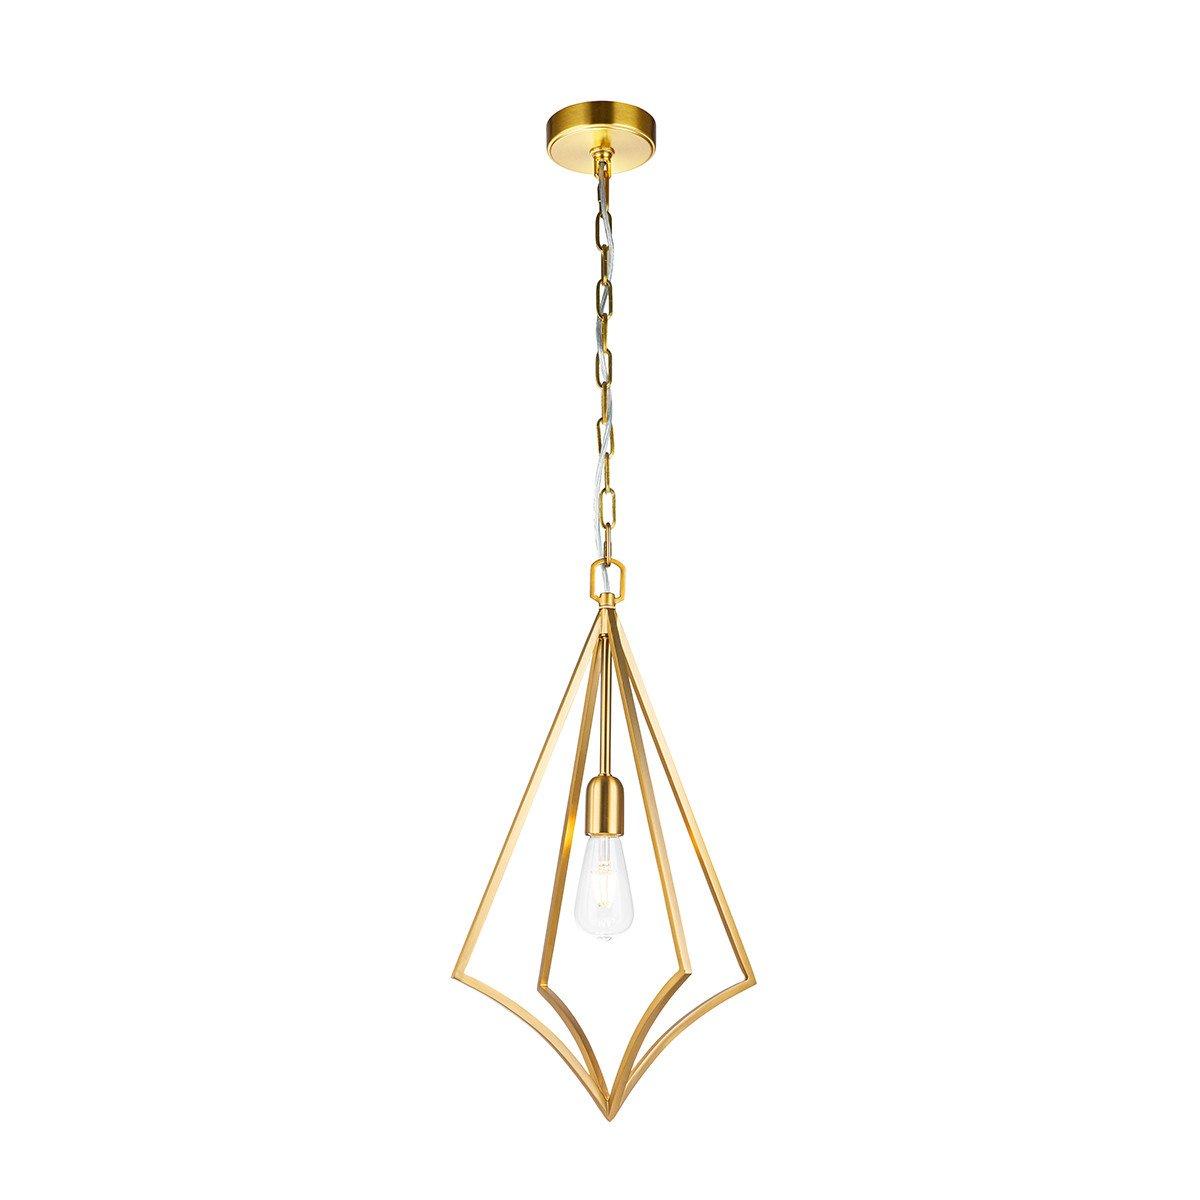 Feiss Nico Wire Frame Pendant Ceiling Light Burnished Brass